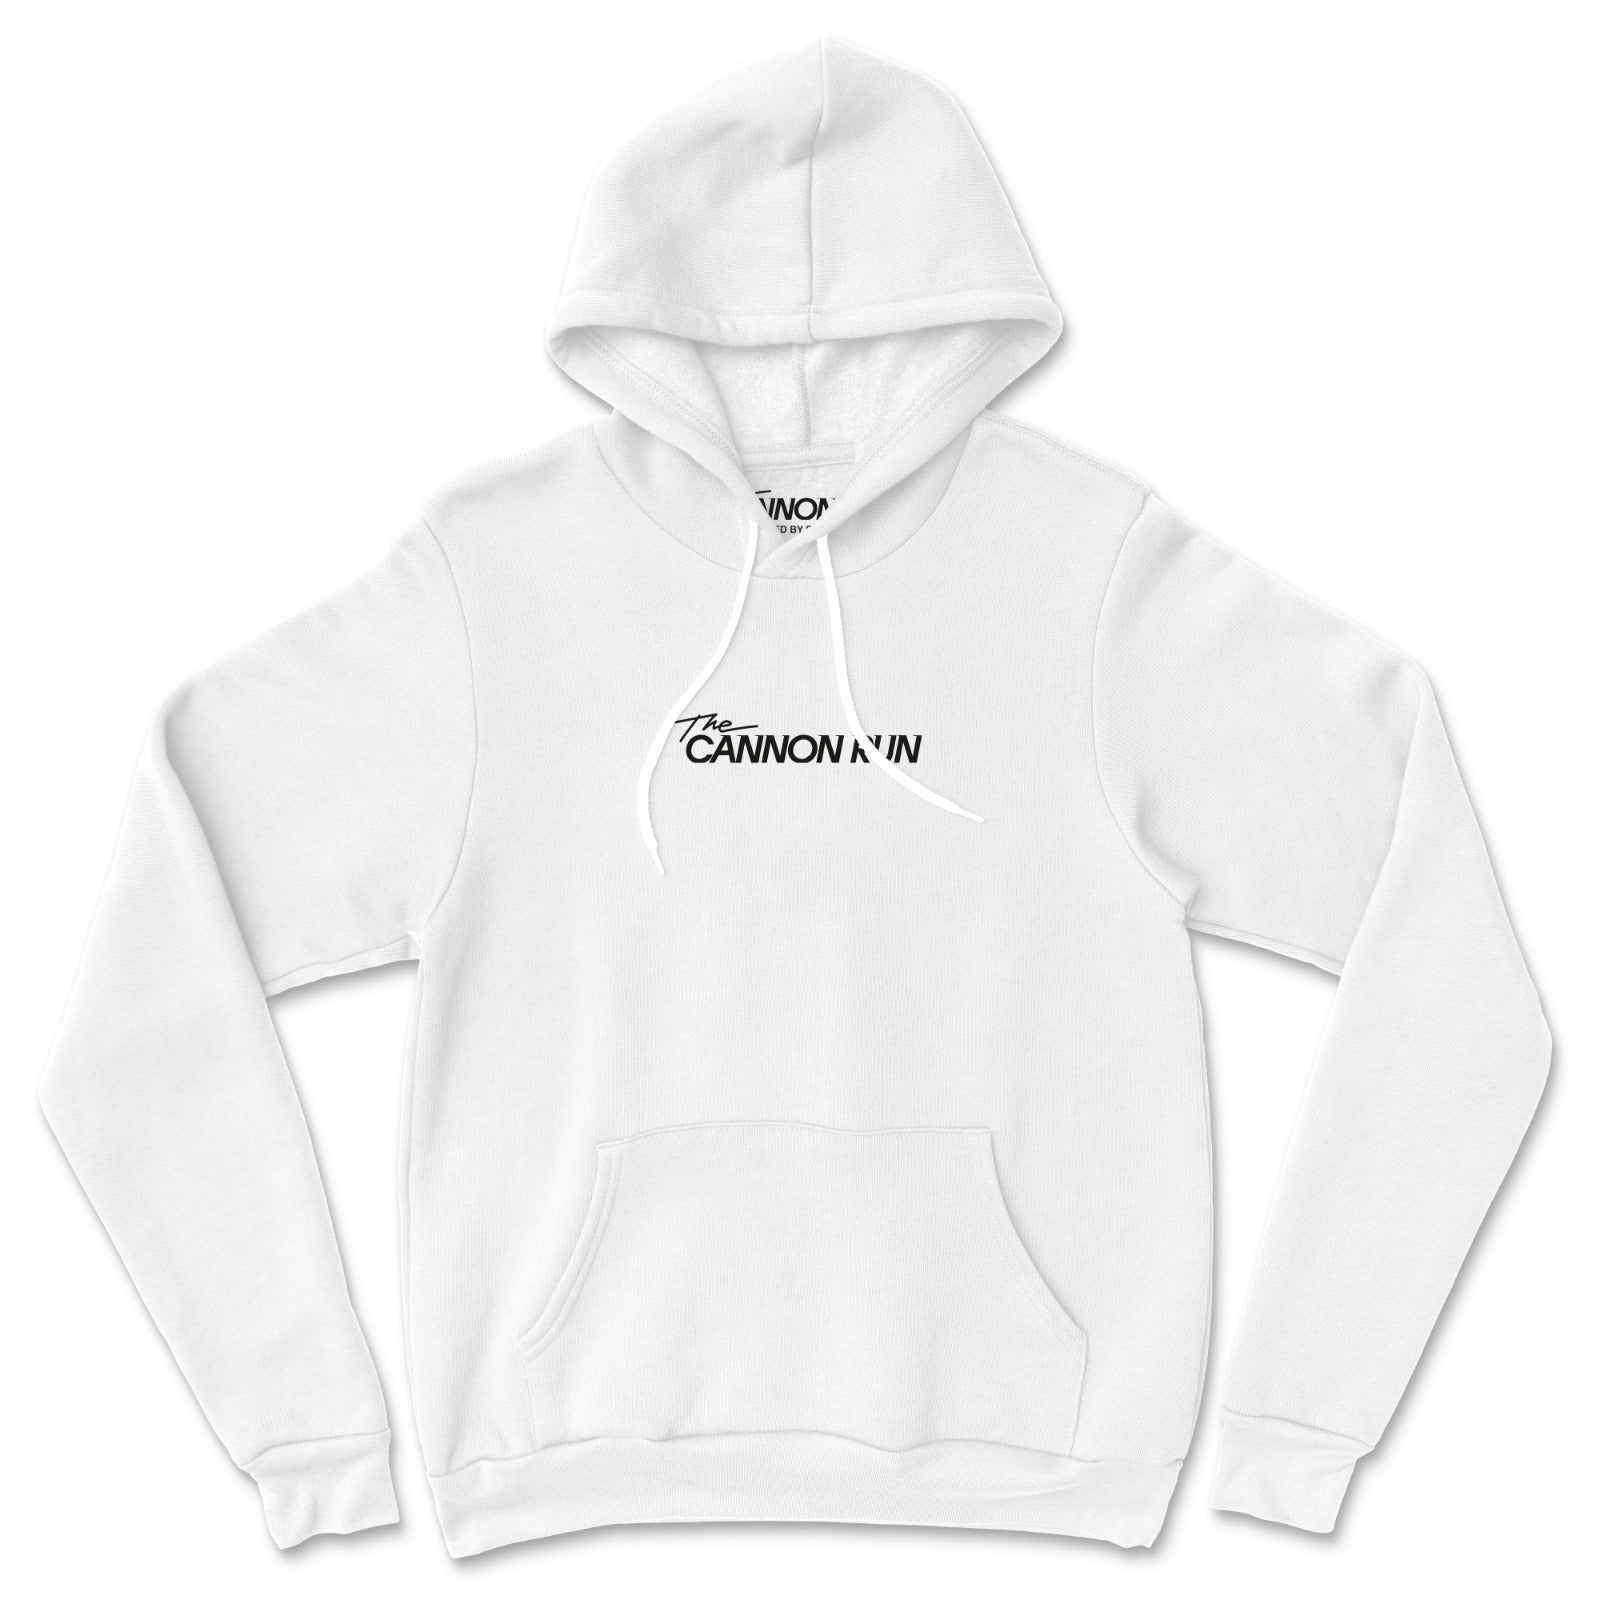 The Cannon Run Sickmade Hoodie White